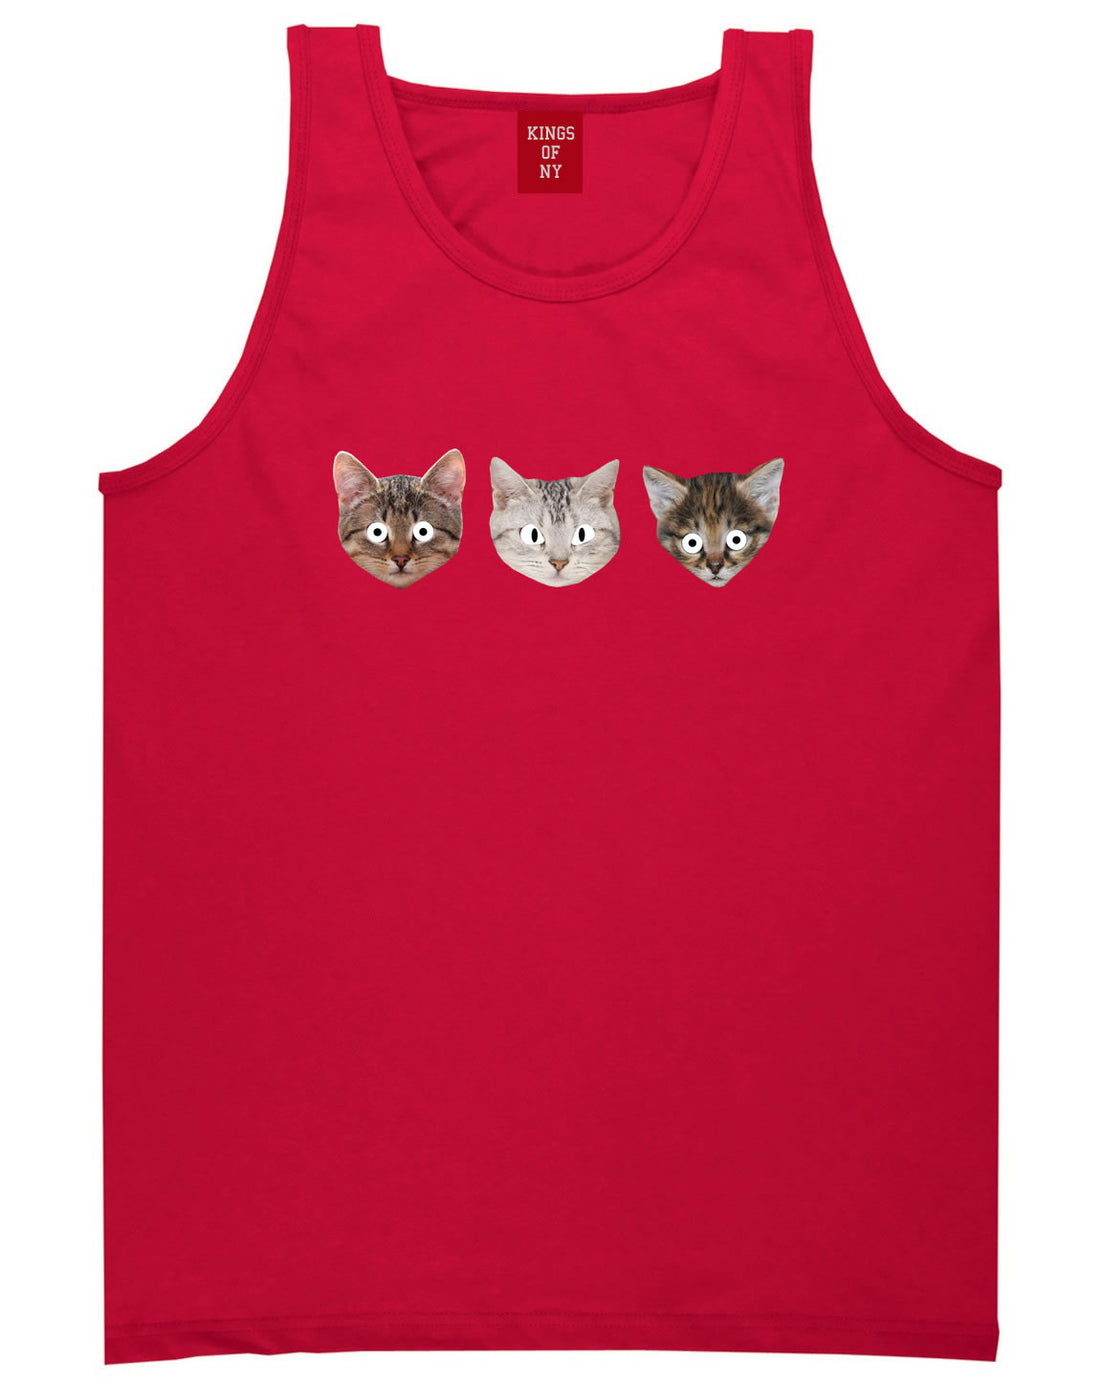 Cats Crazy Kittens Tank Top in Red By Kings Of NY